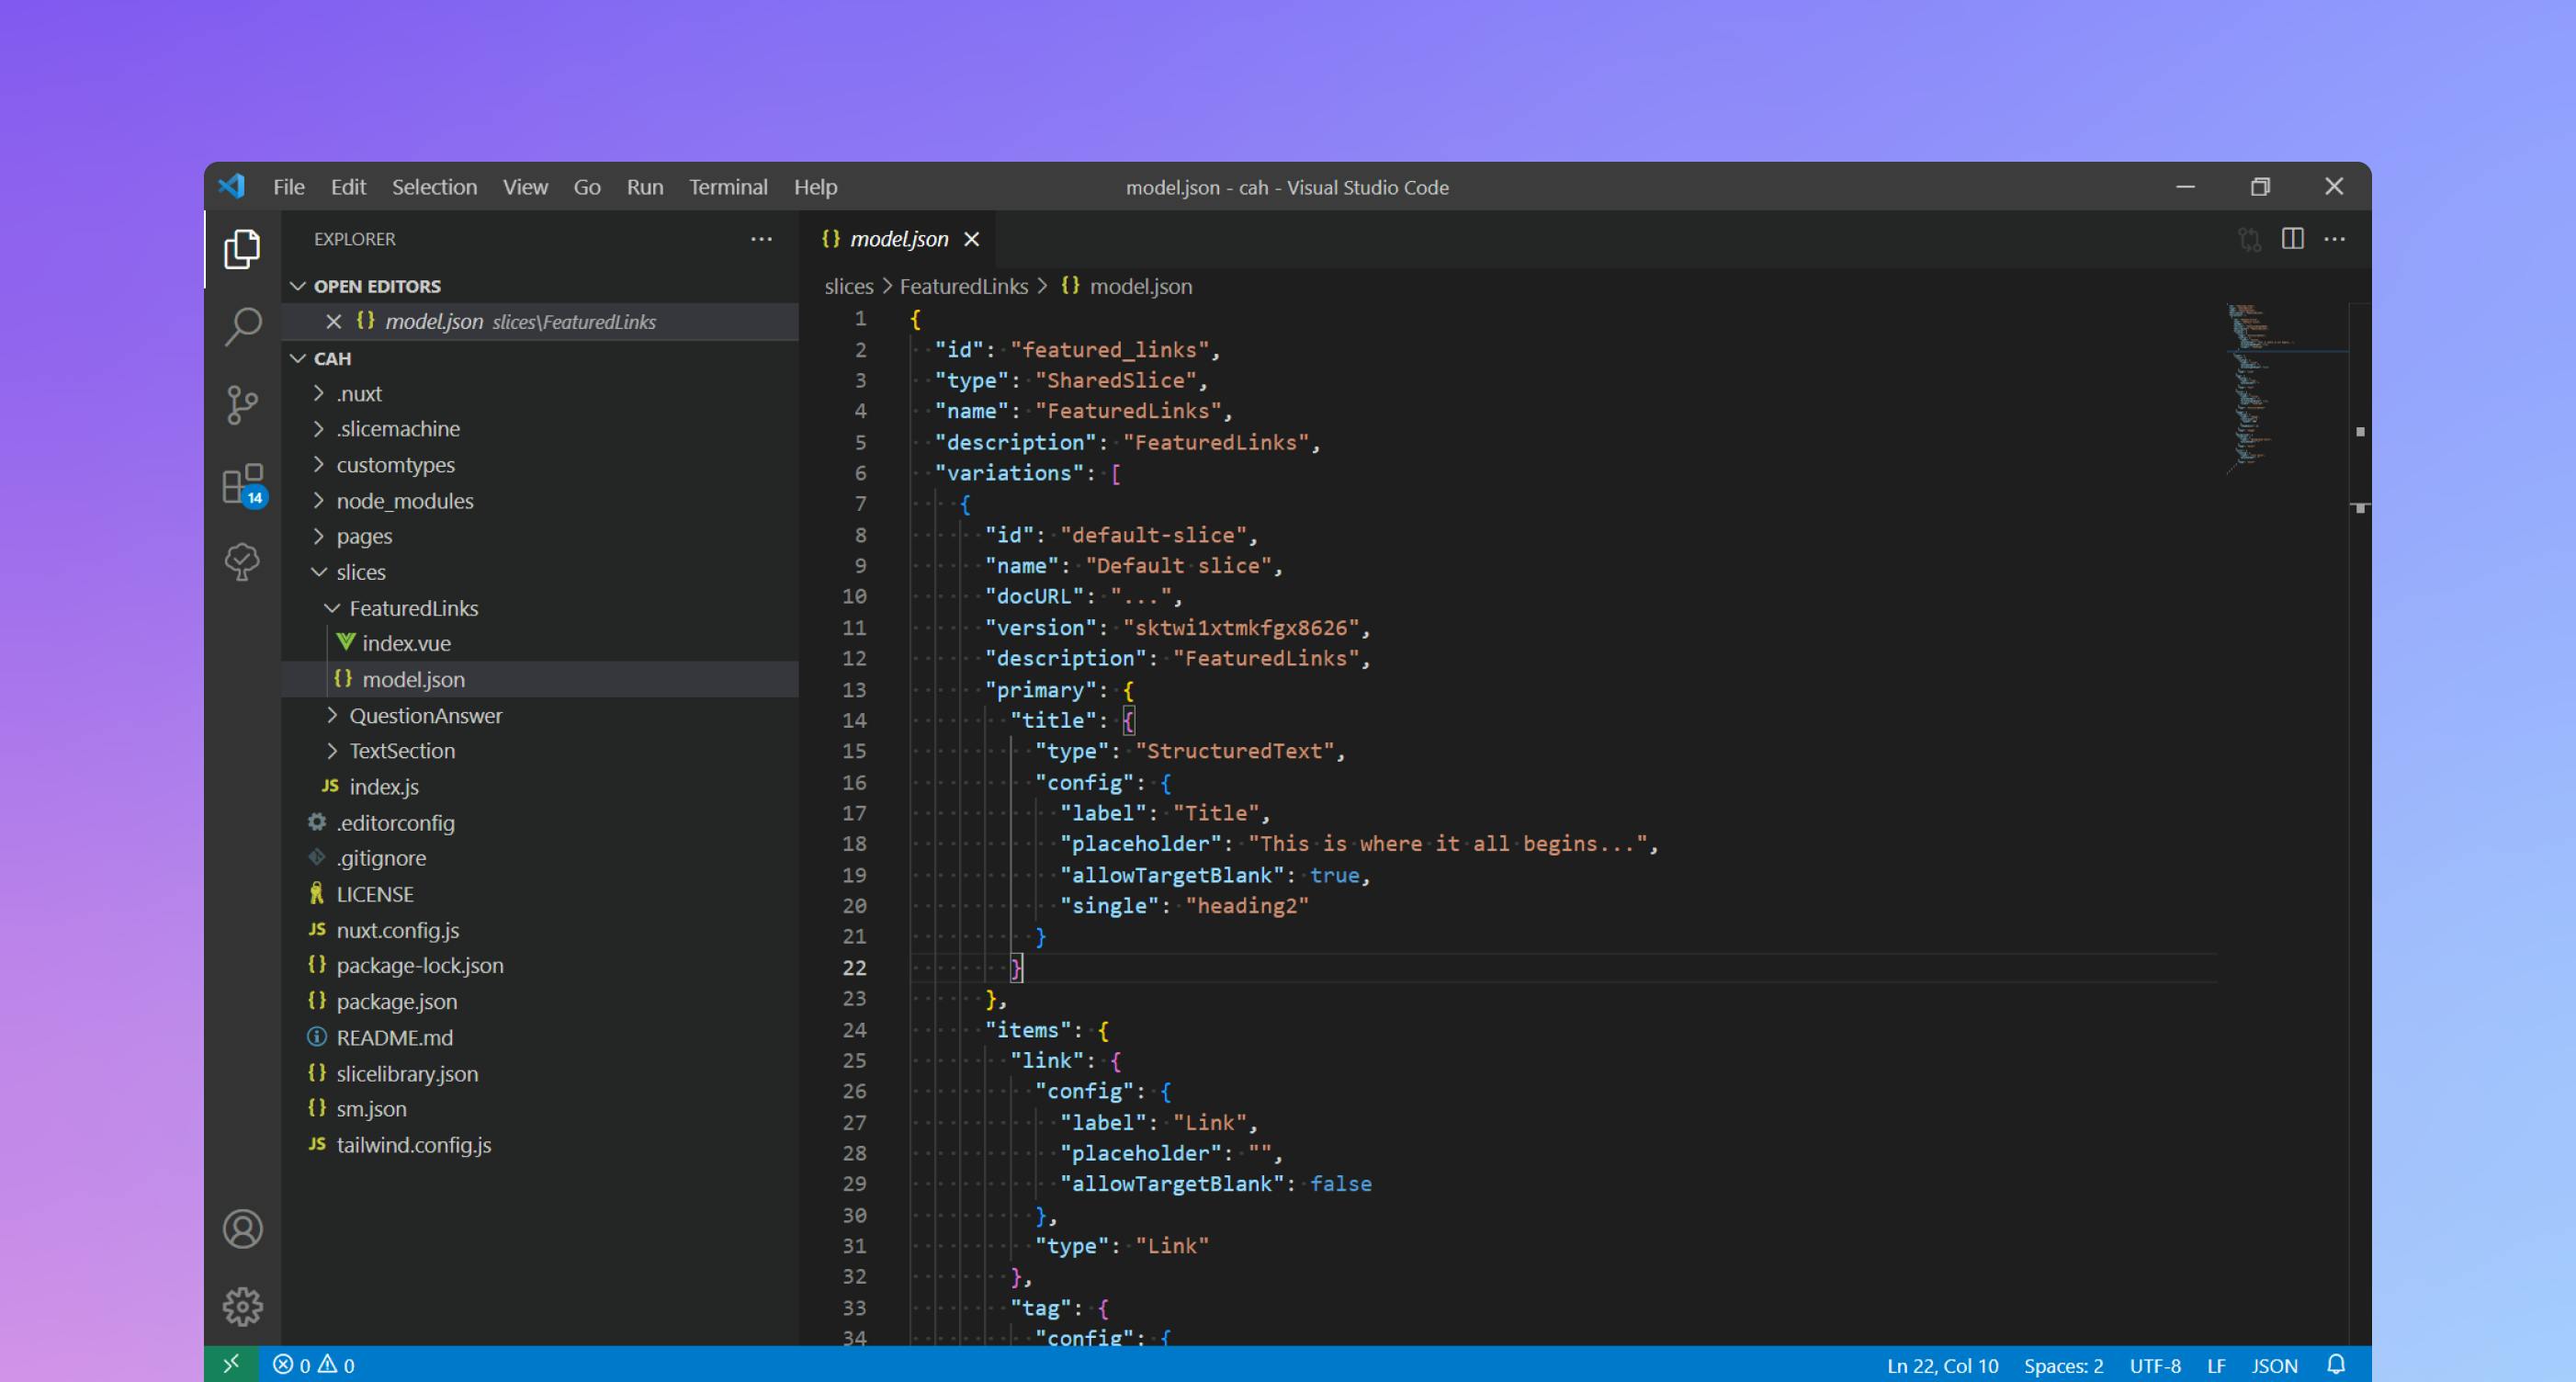 Screenshot of a Content Model that's versioned in code in a VS code editor.